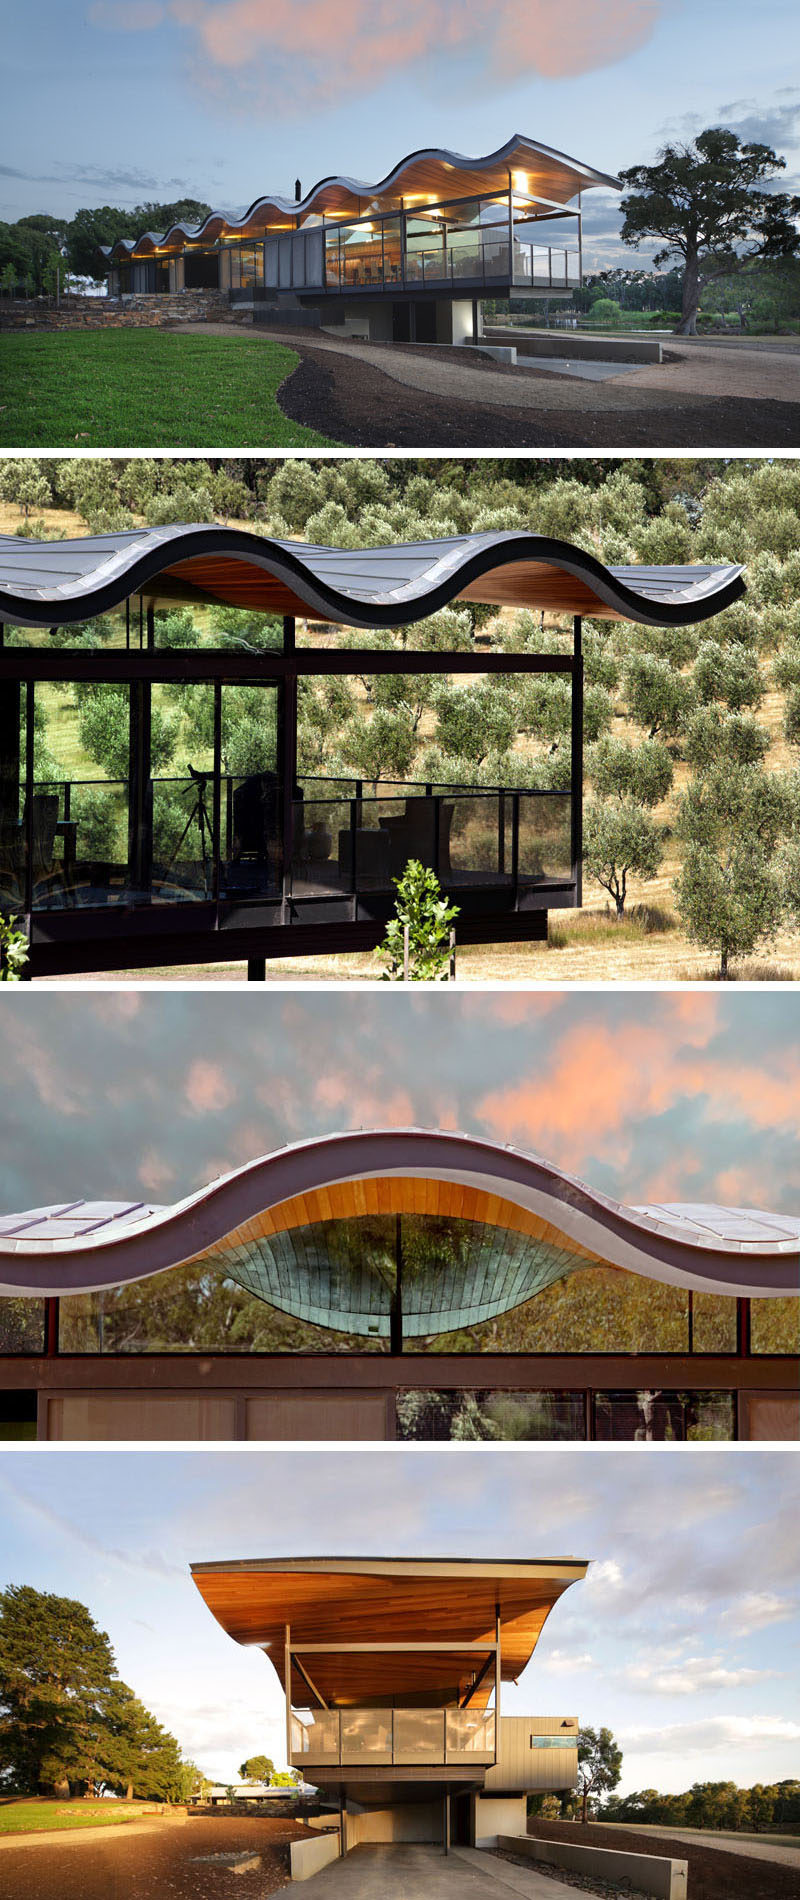 This modern house in Australia features a sculptural and wavy roof made from metal and wood, that's been designed to mimic the rolling hills surrounding the home.